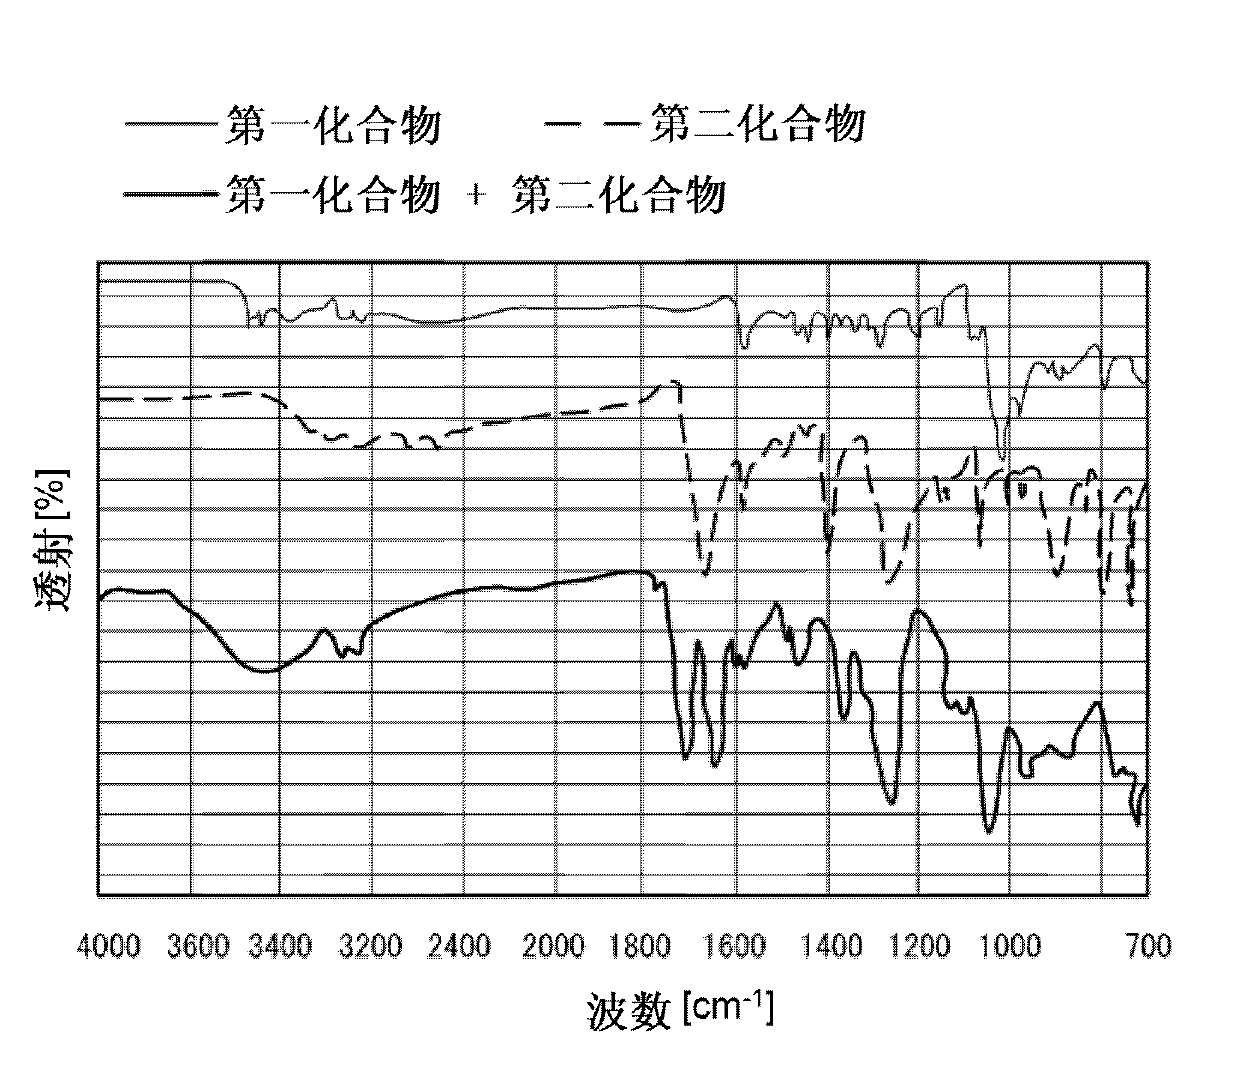 Electroconductive polymer solution, electroconductive polymer composition, solid electrolytic capacitor therewith and method for producing same ?